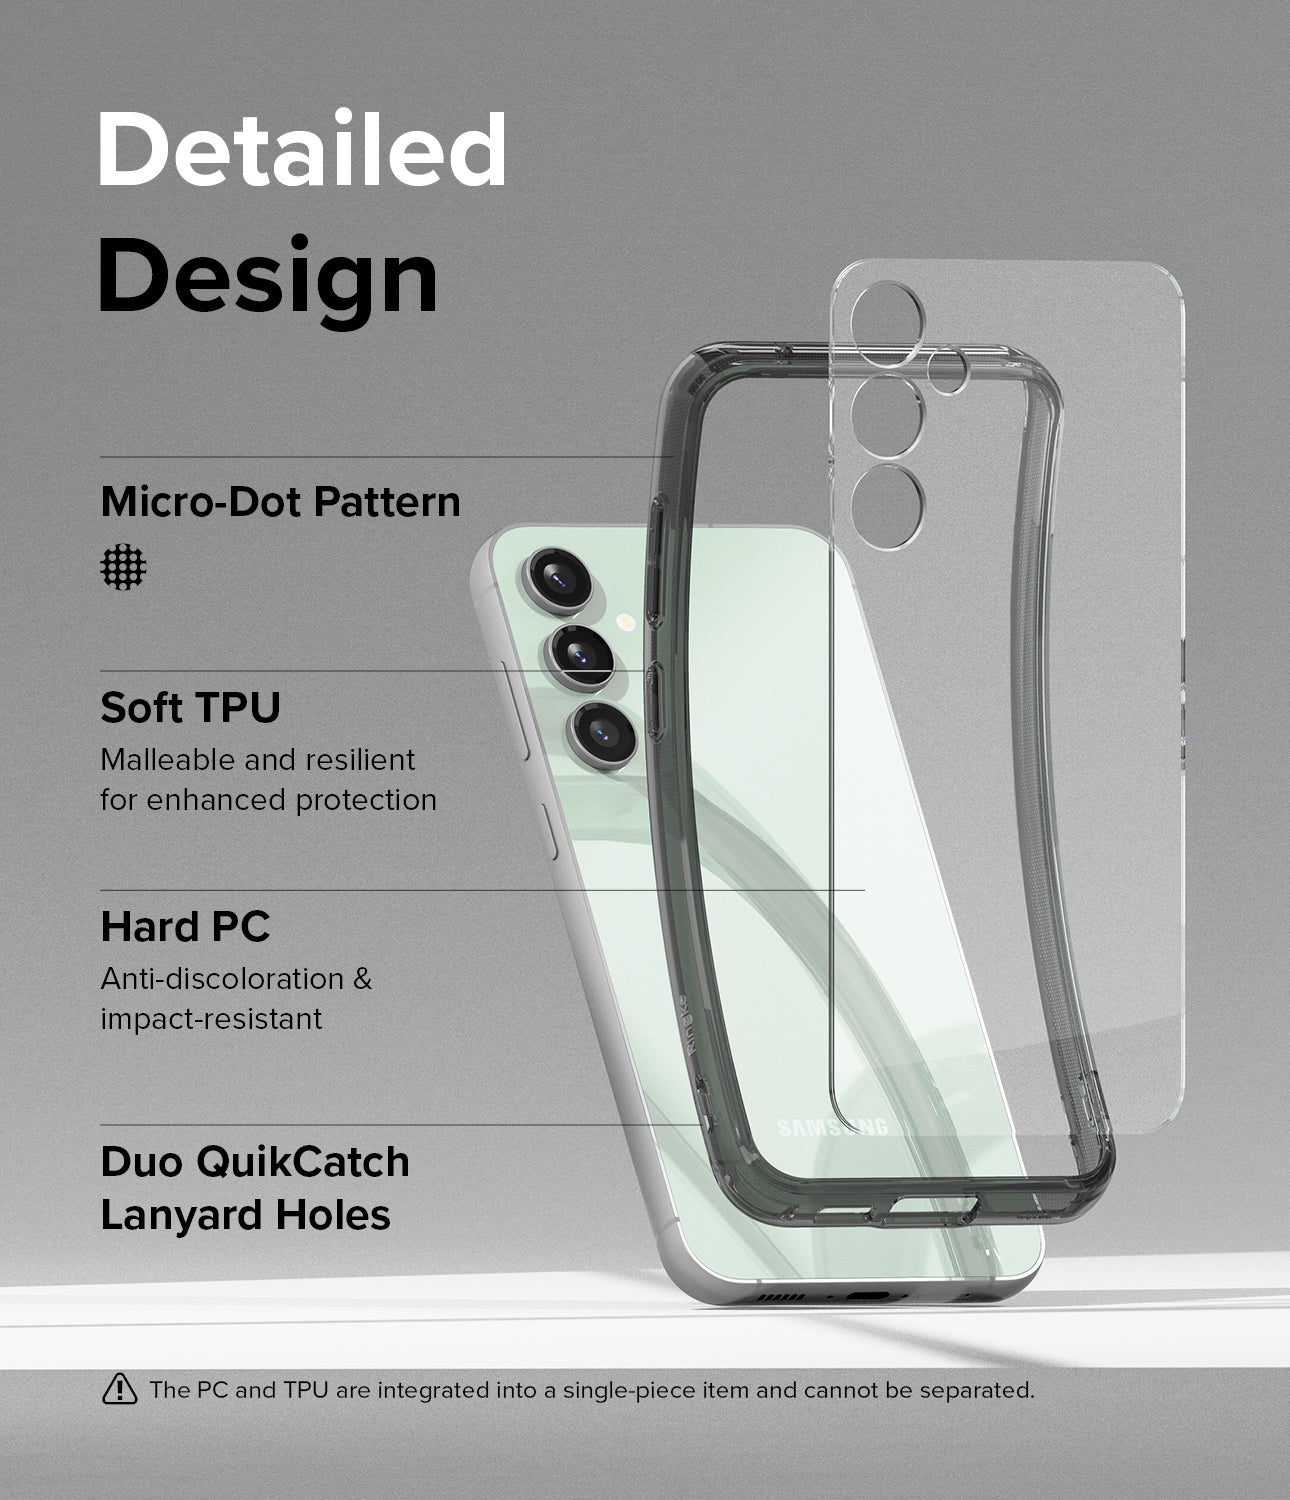 Galaxy S23 FE Case | Fusion-Smoke Black - Detailed Design. Micro-Dot Pattern. Malleable and resilient for enhanced protection with Soft TPU. Anti-discoloration and impact-resistant with Hard PC. Duo QuikCatch Lanyard Holes.